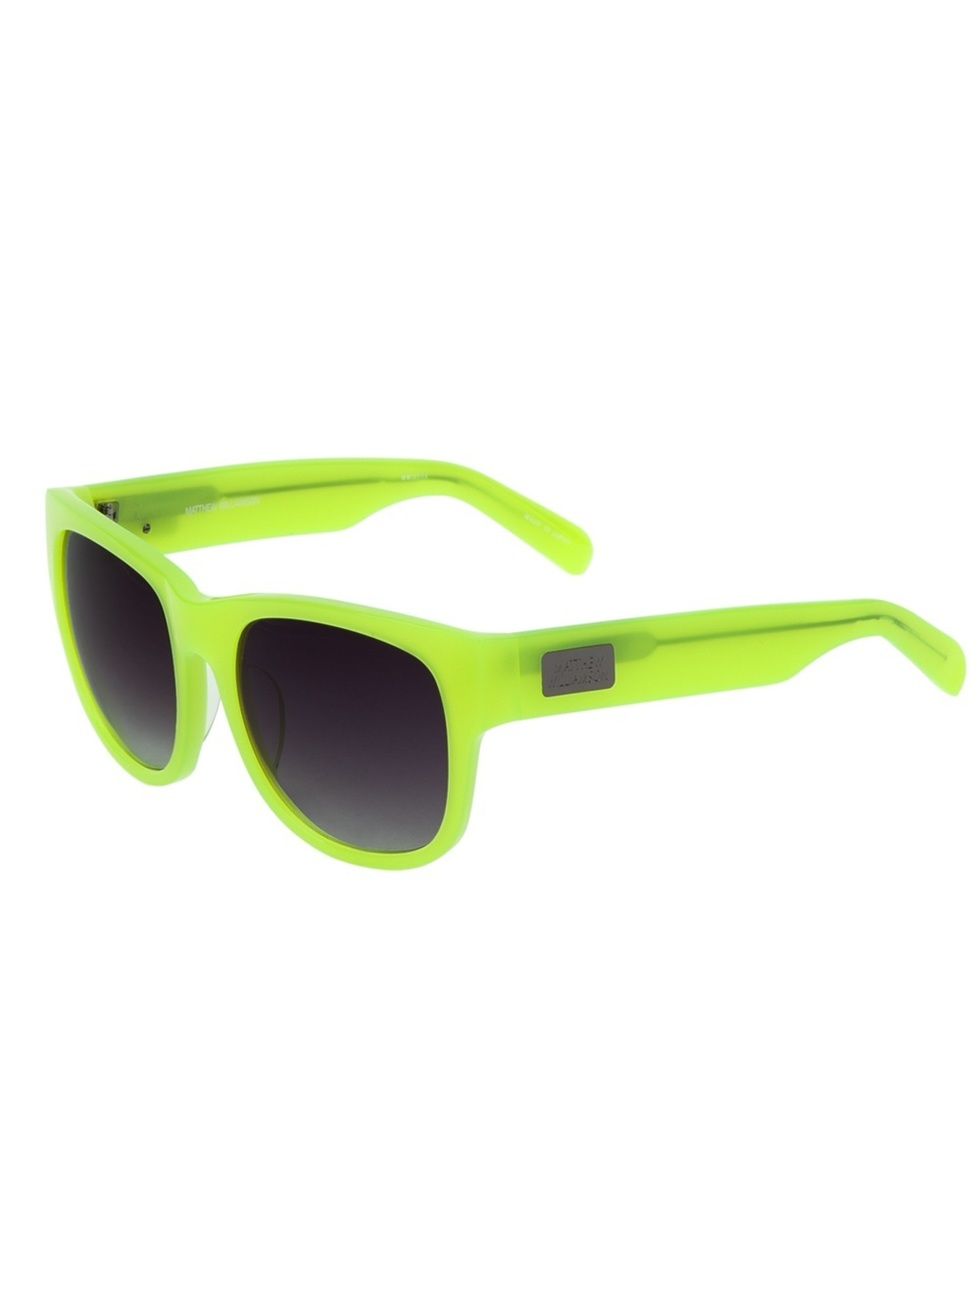 Eyewear, Vision care, Product, Yellow, Green, Personal protective equipment, Goggles, Sunglasses, Line, Amber, 